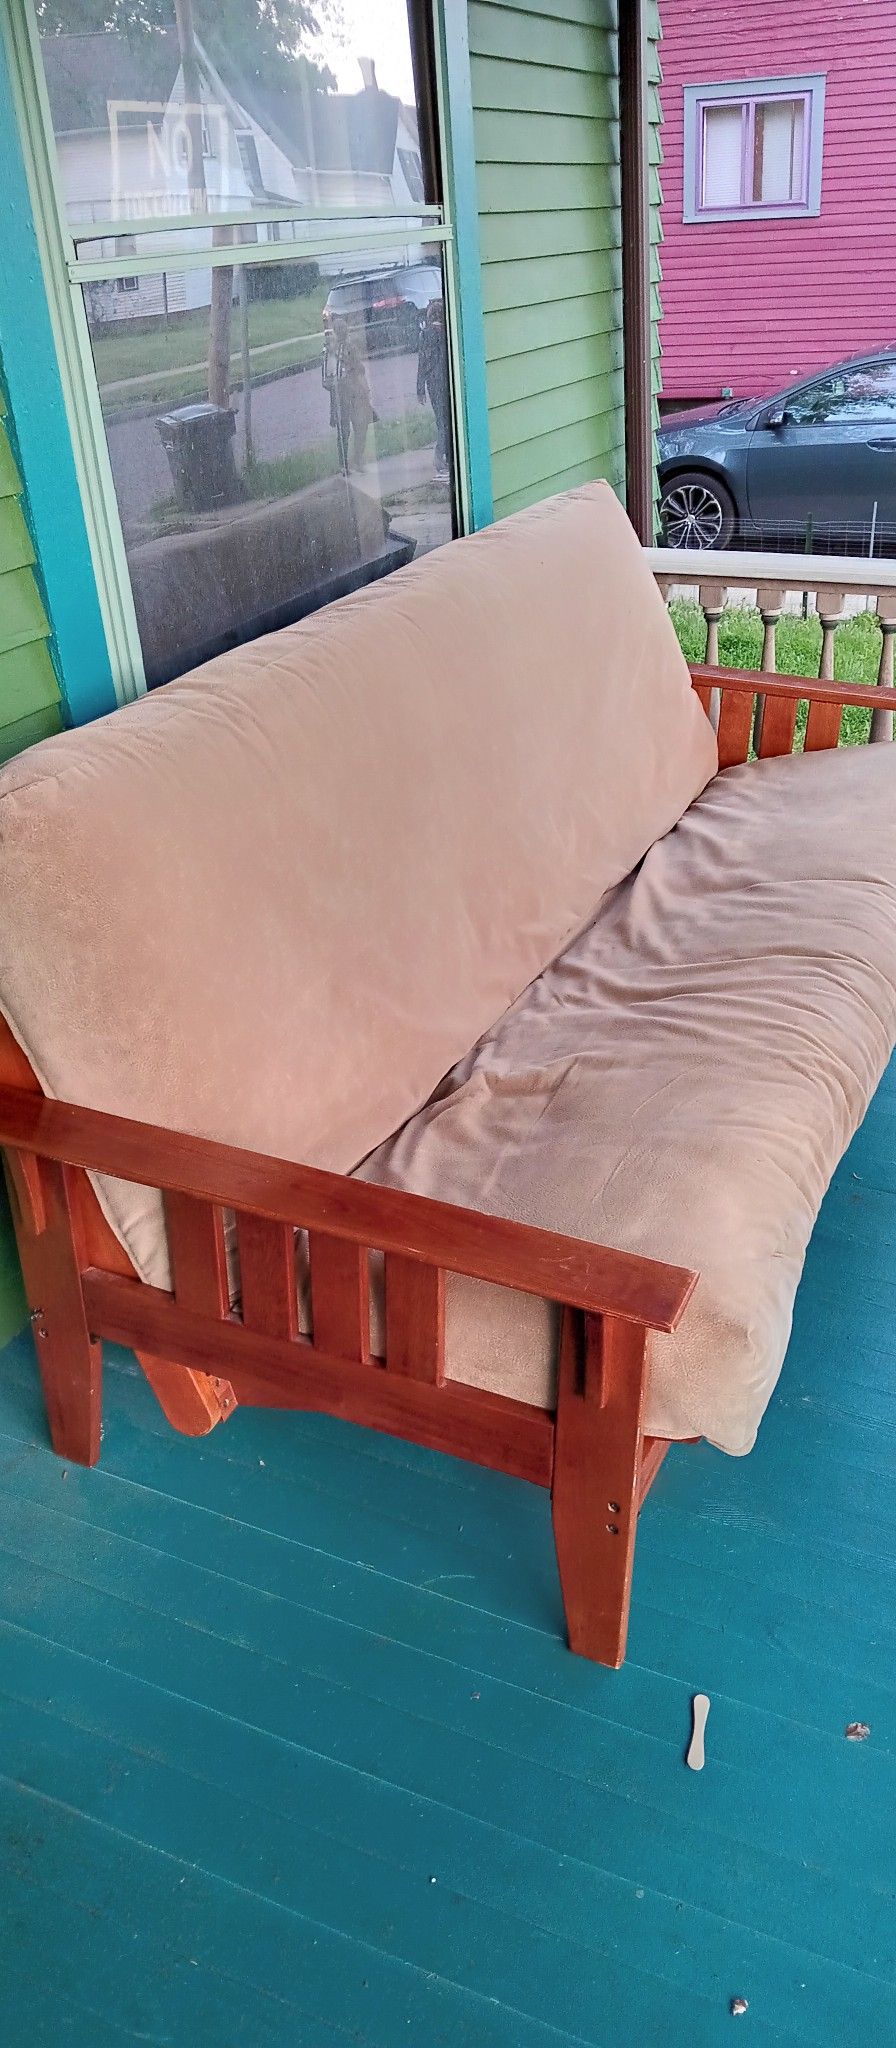 All Wooden Plush Futon Bed /Couch Combo Very very Nice Smells Great And It Yours